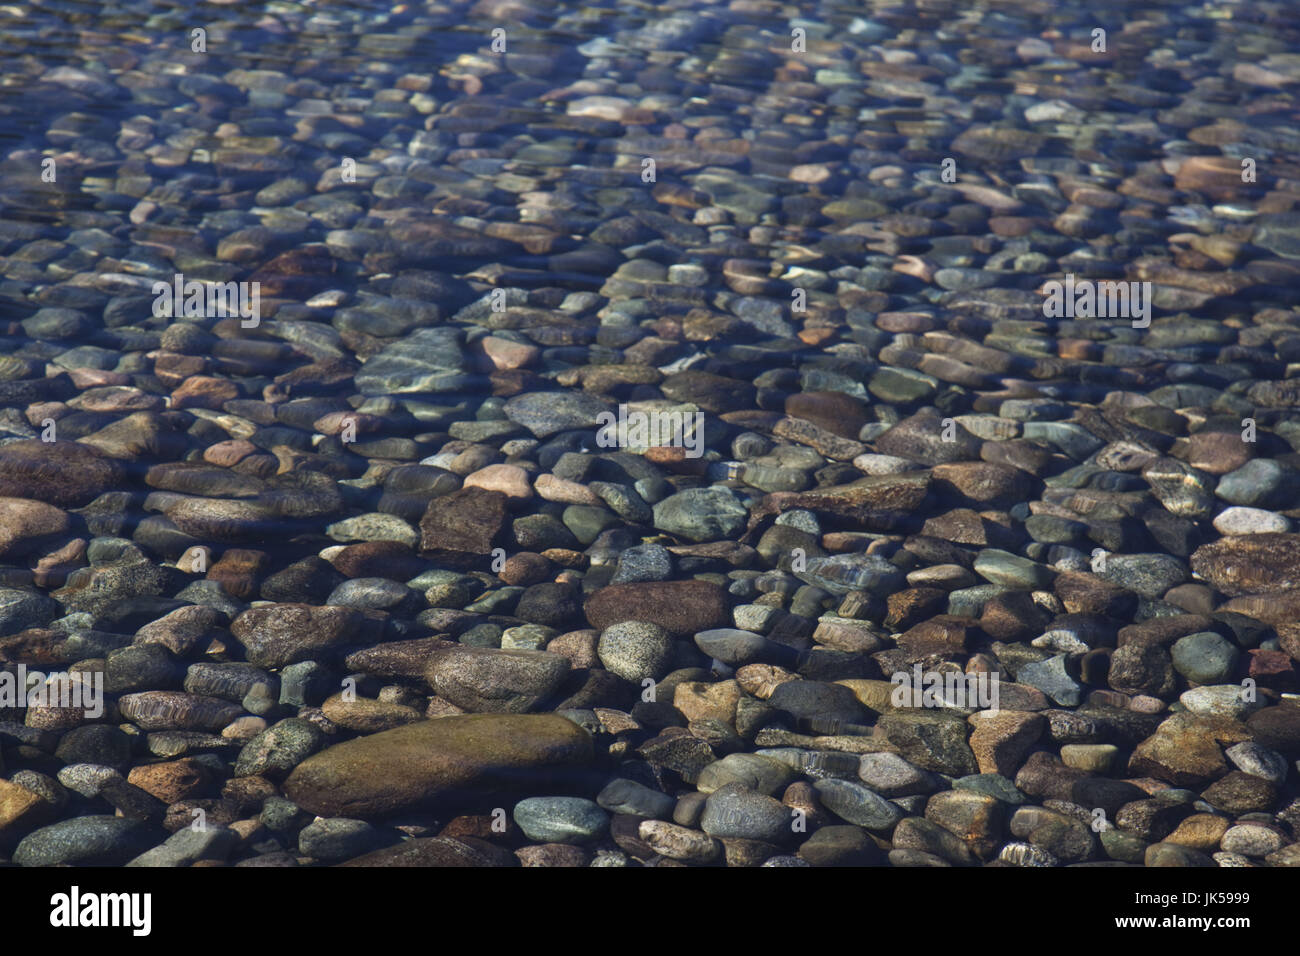 Argentina, Patagonia, Chubut Province, Parque Nacional Lago Puelo, clear water of Lago Puelo lake Stock Photo